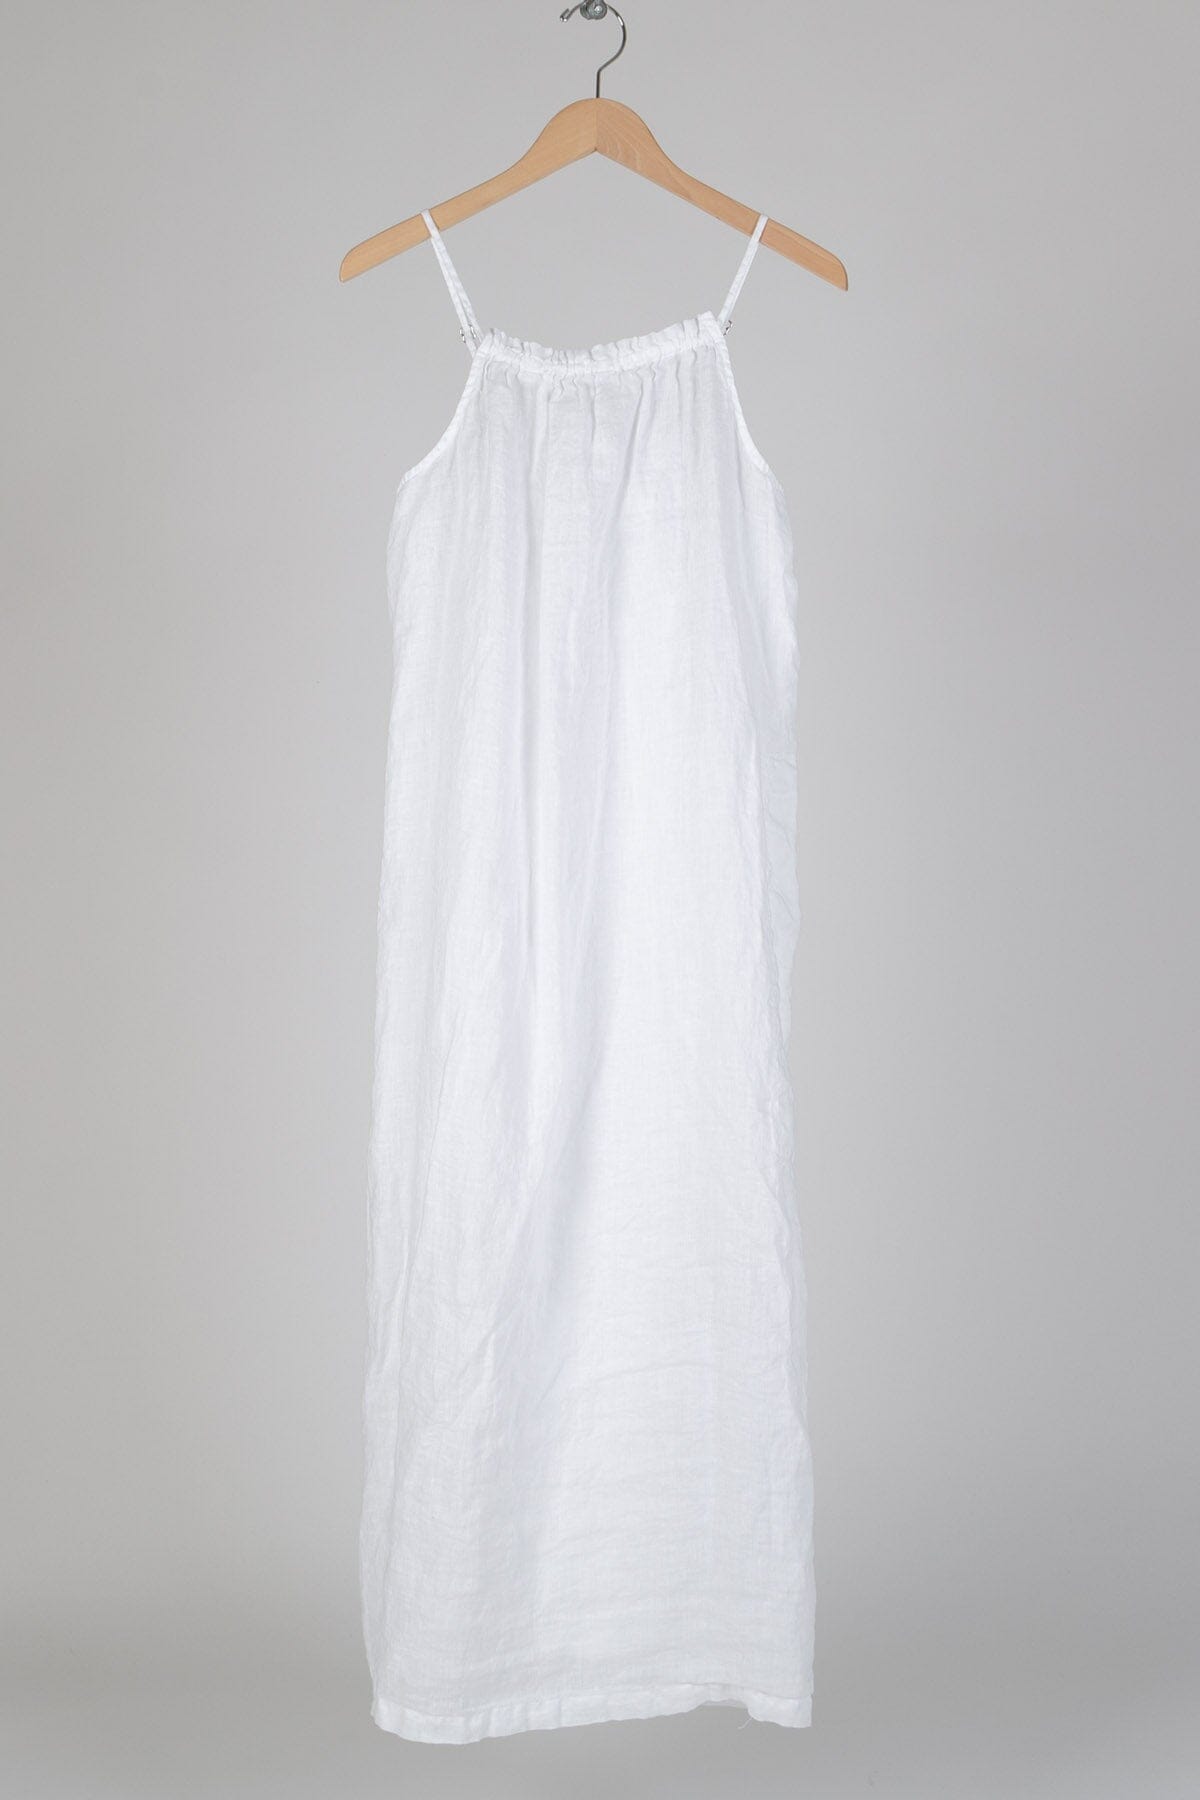 Bianca - Linen S17 - Solid Linen Dresses CP Shades white